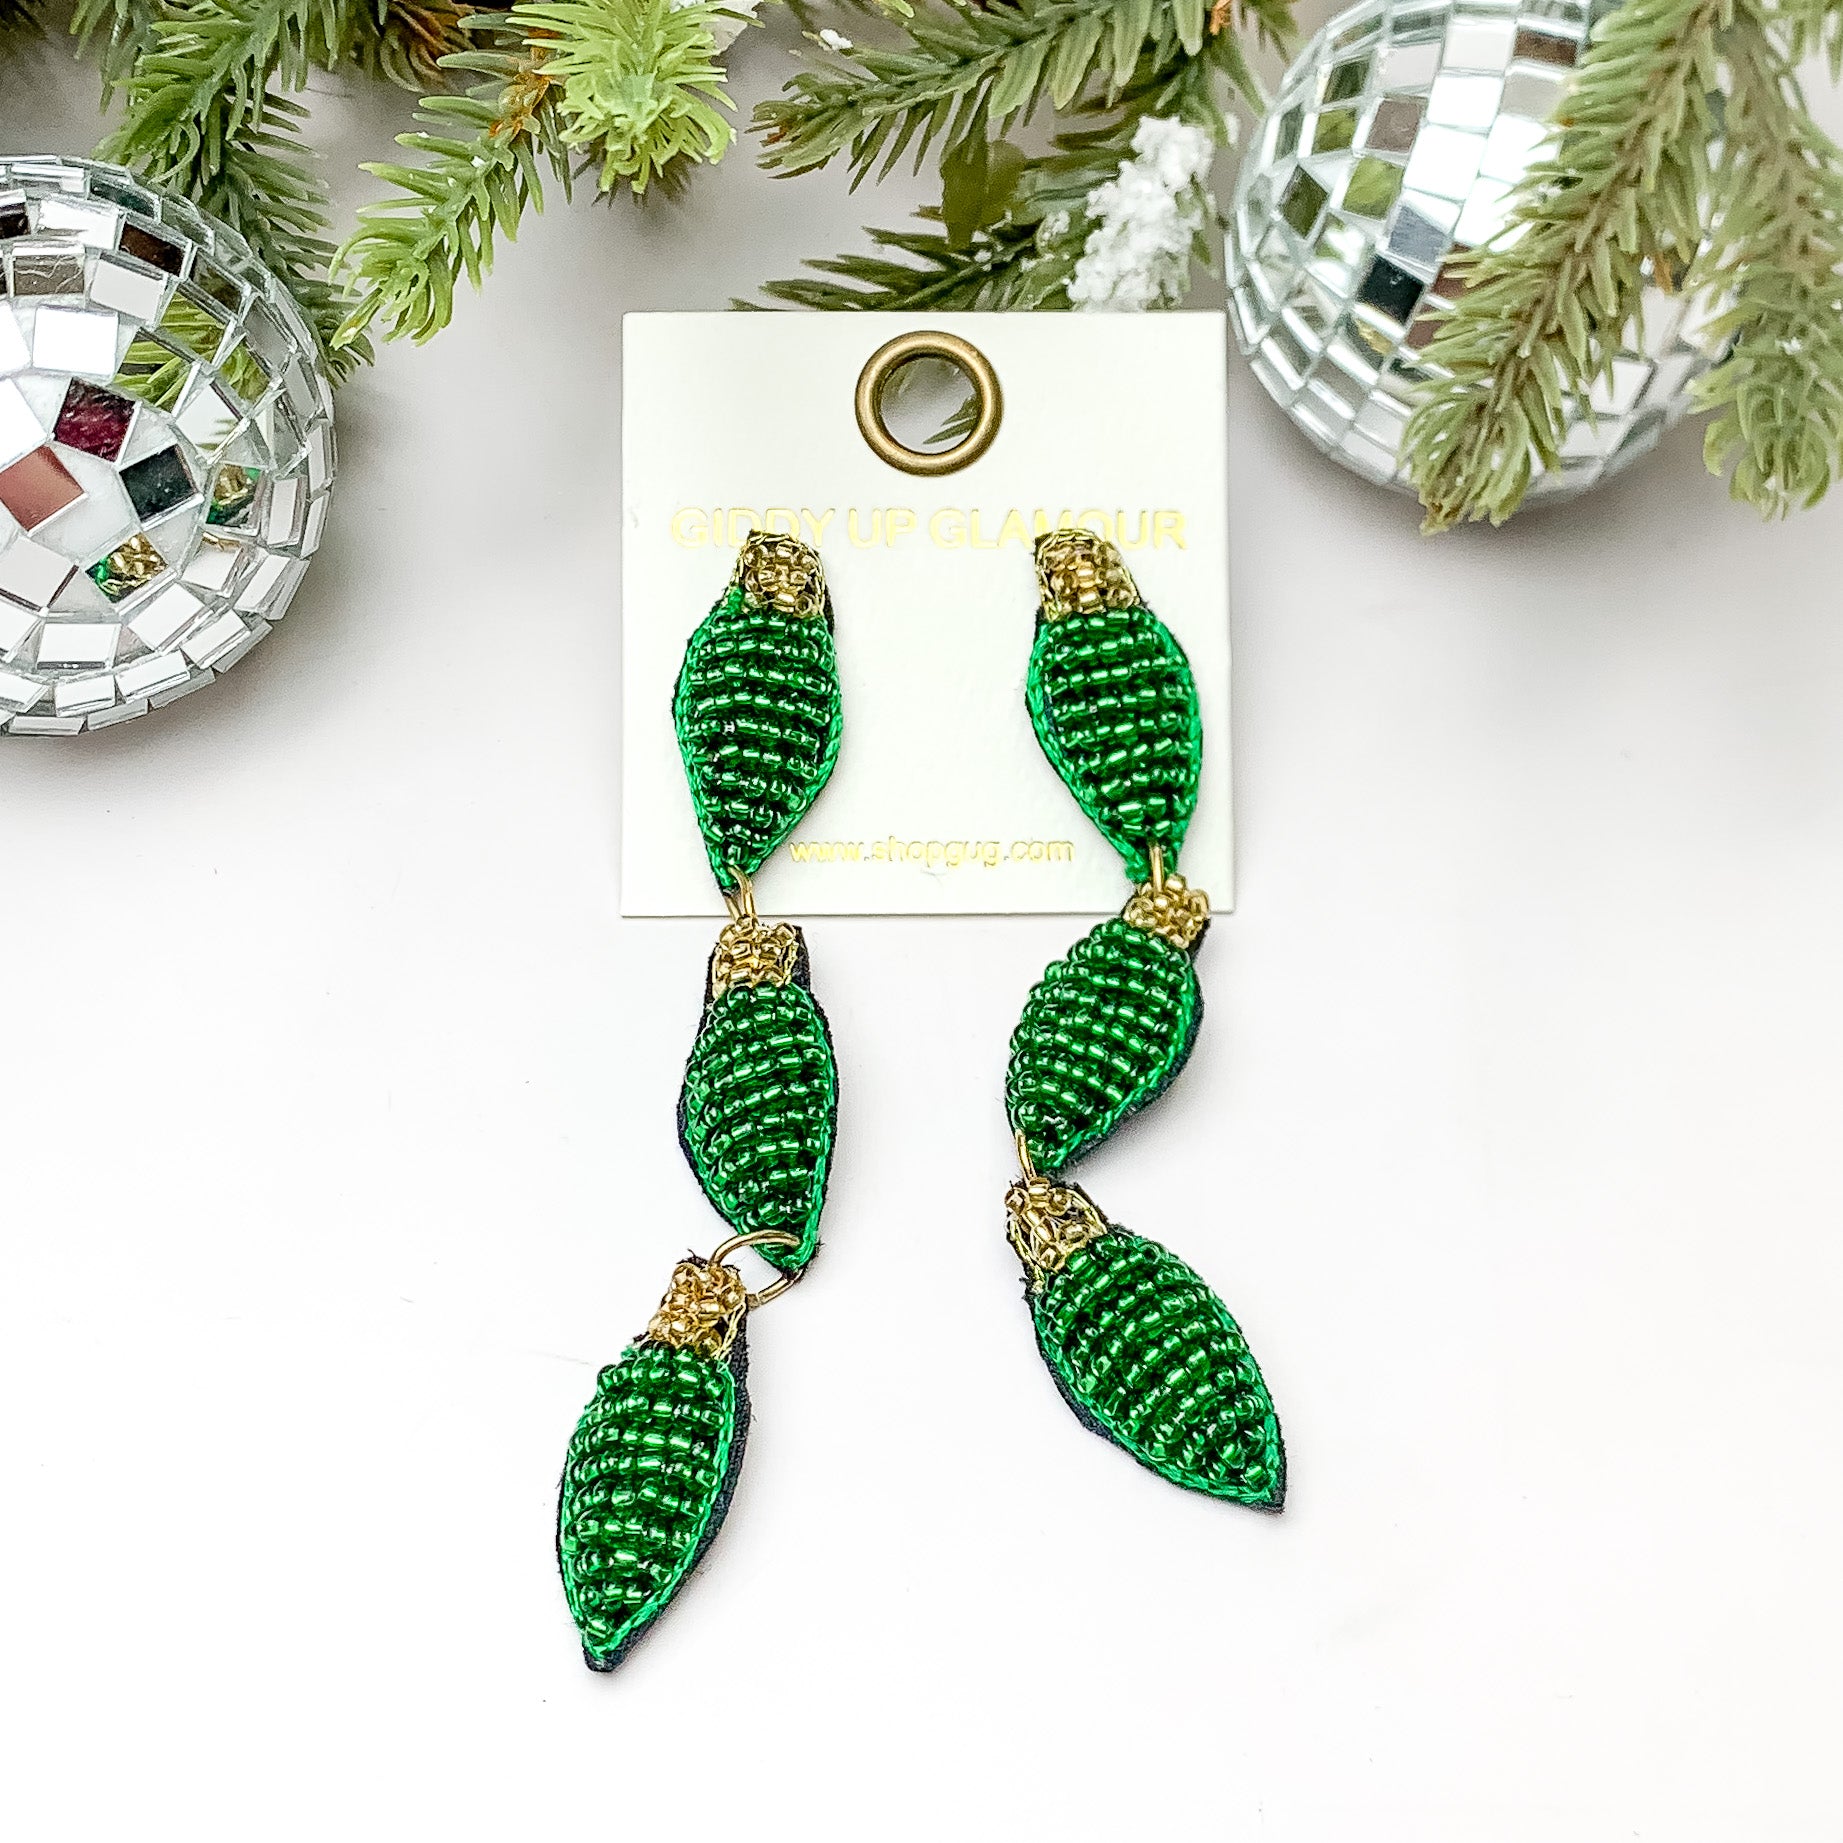 Beaded Christmas Light Drop Earrings in Green - Giddy Up Glamour Boutique